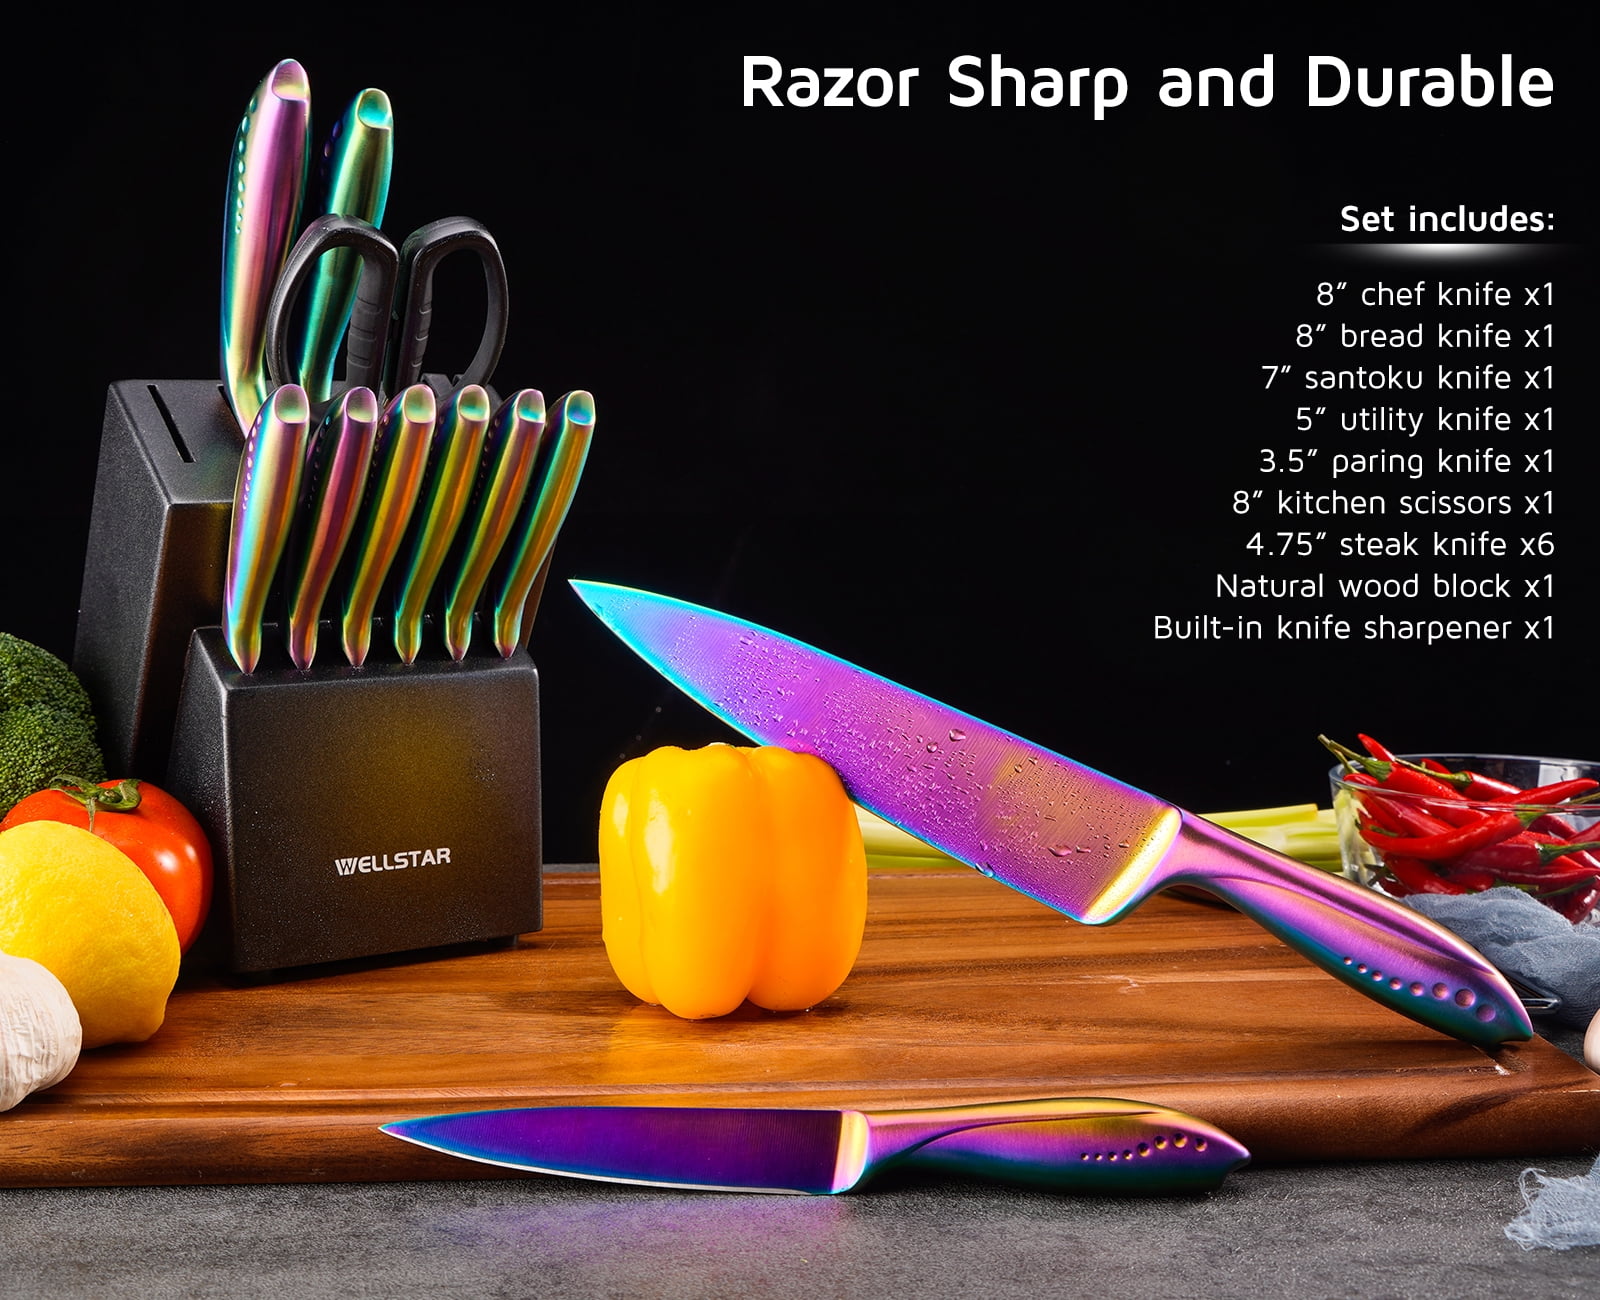 WELLSTAR Kitchen Knife Set 5 Piece, Razor Sharp German Stainless Steel Blade and Comfortable Handle with Rainbow Titanium Coated, Chef Carving Bread